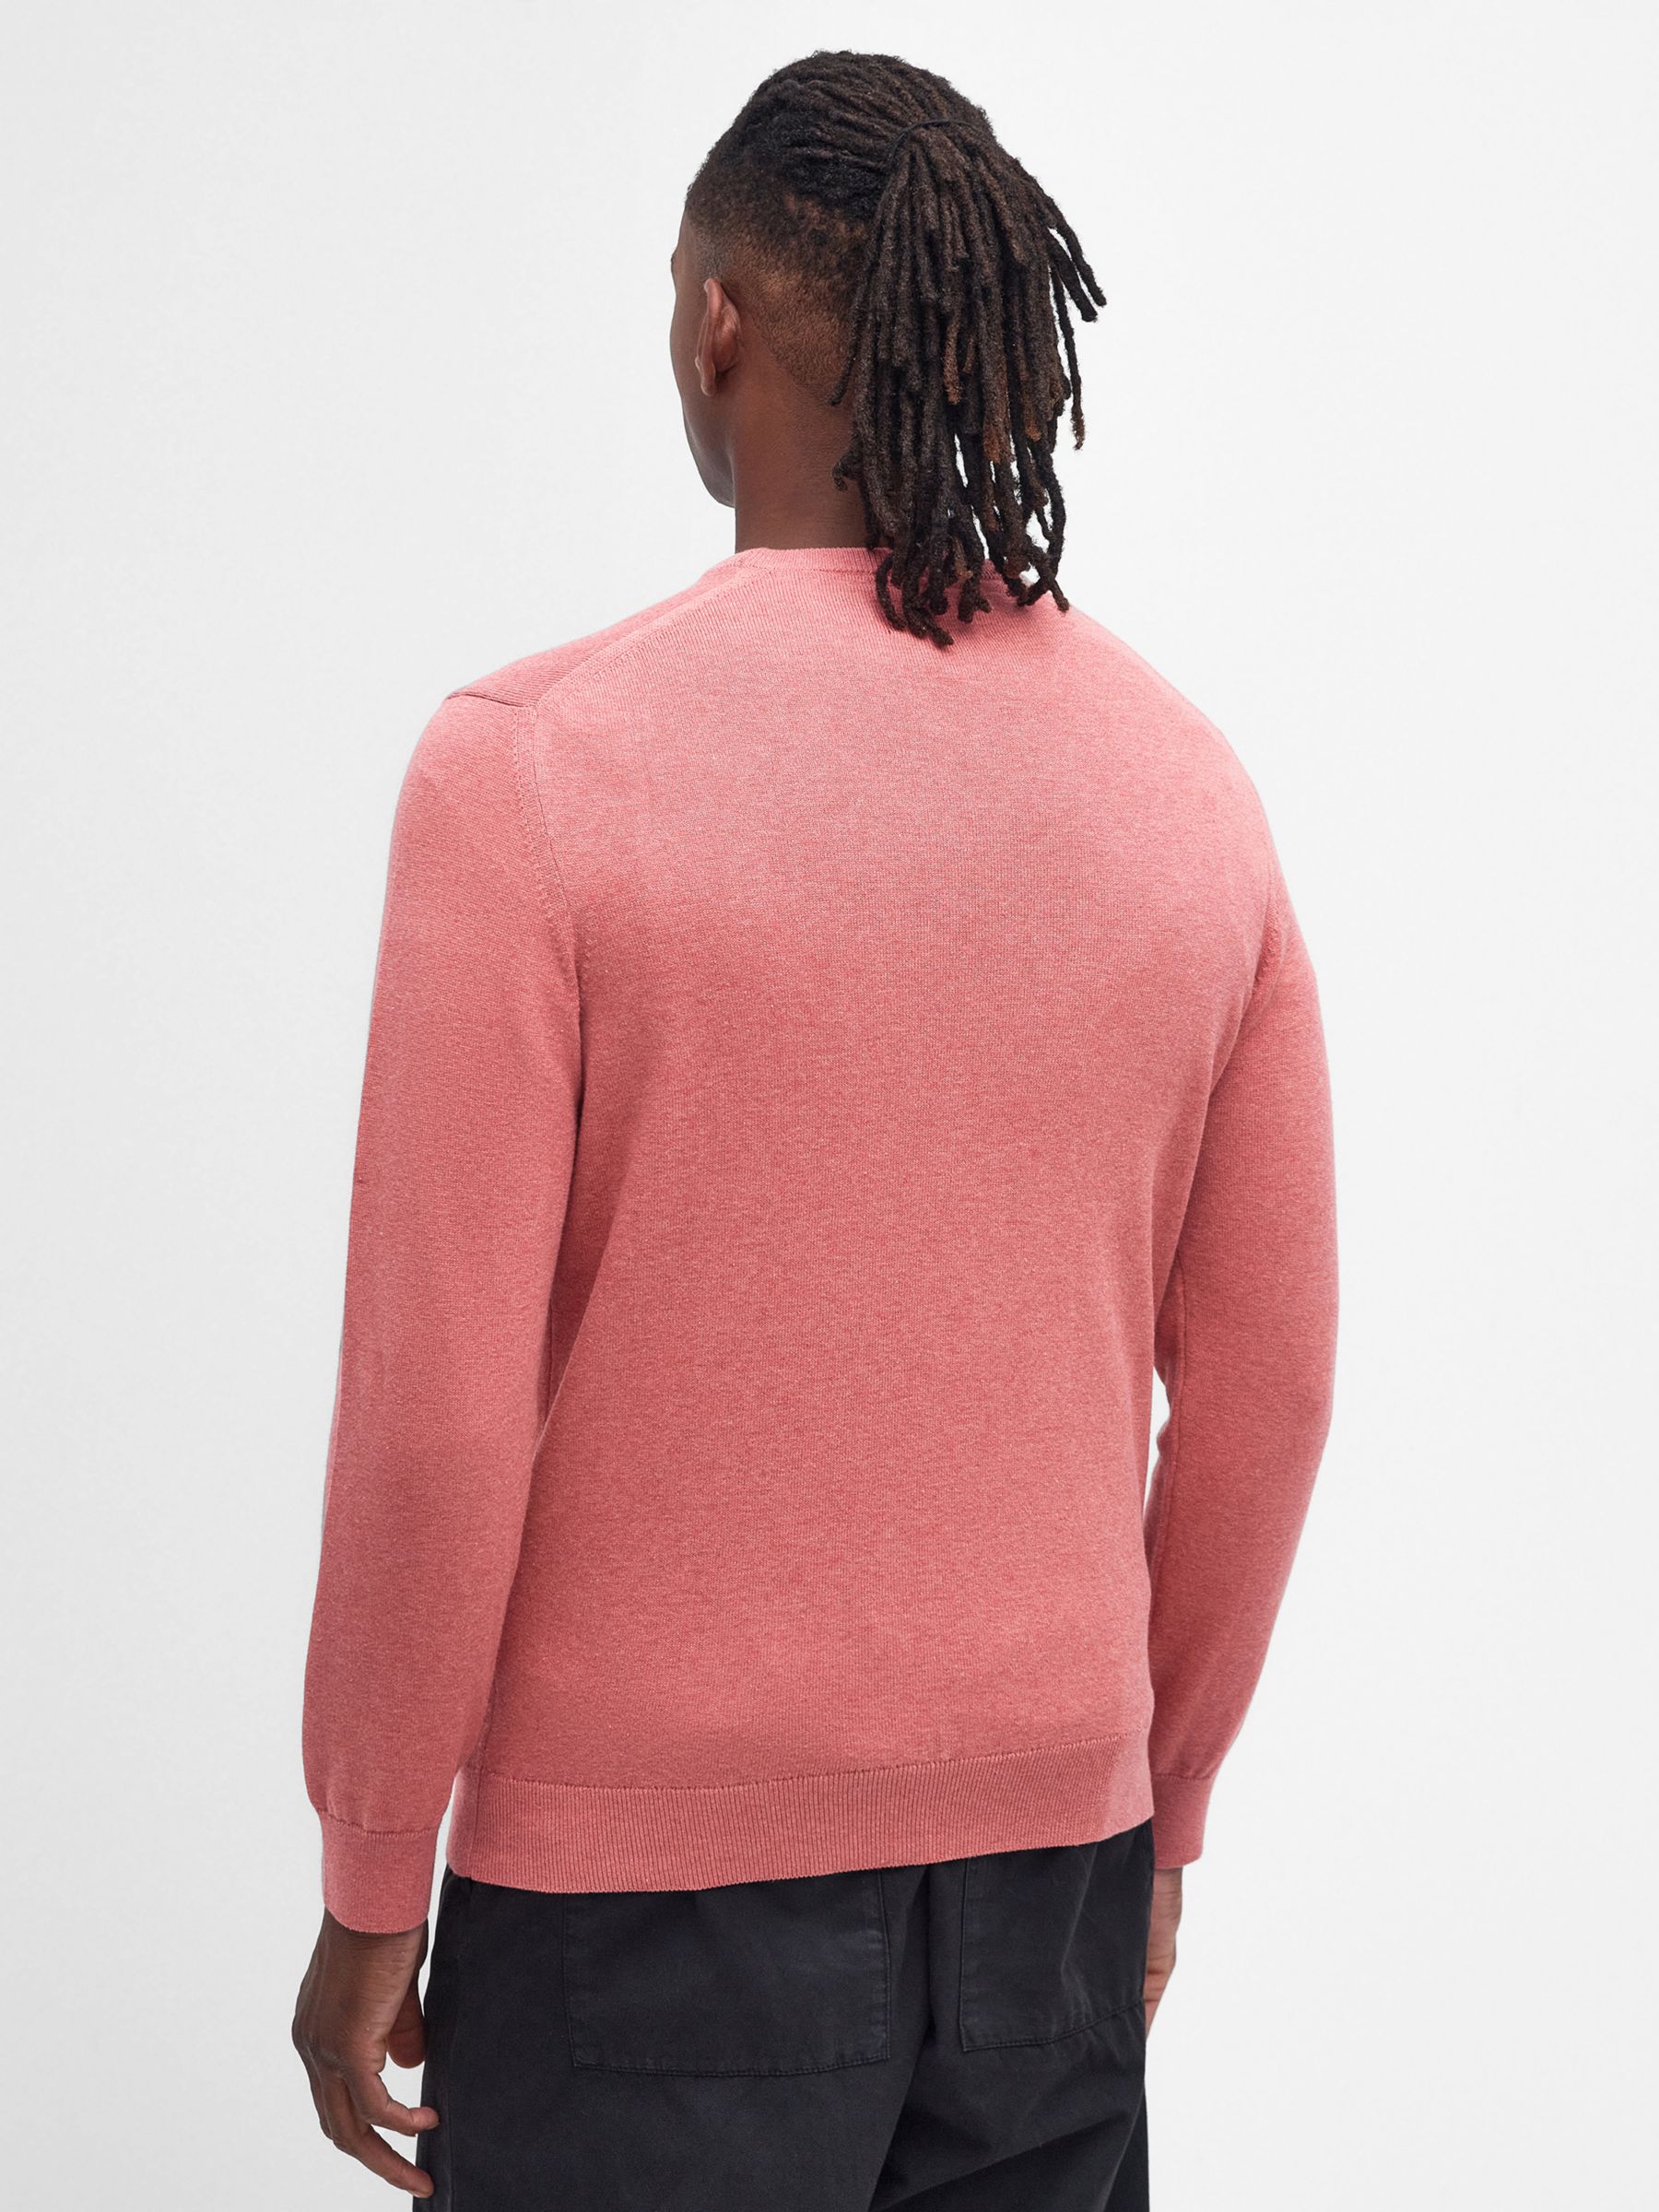 Barbour Pima Cotton Crew Jumper, Pink Clay at John Lewis & Partners